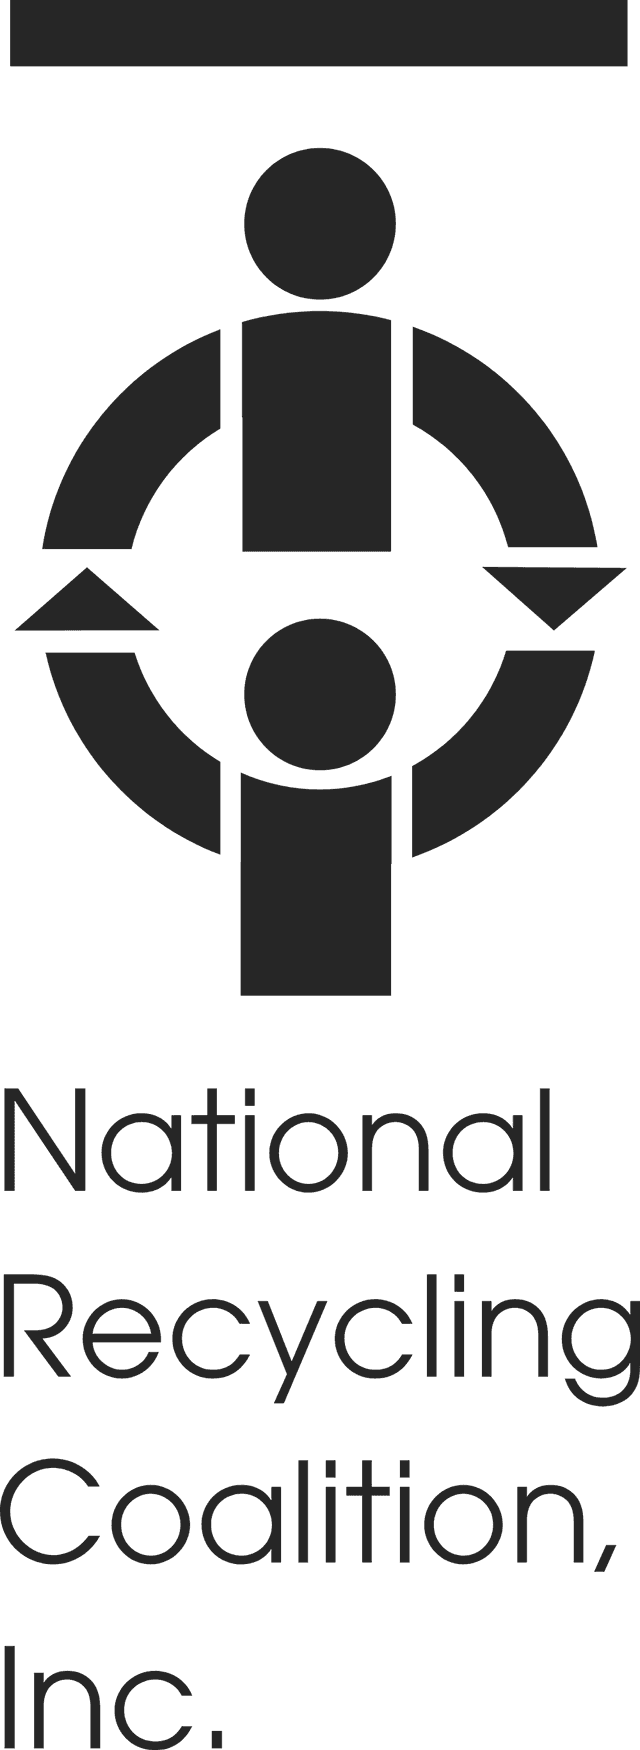 National Recycling Coalition Logo download